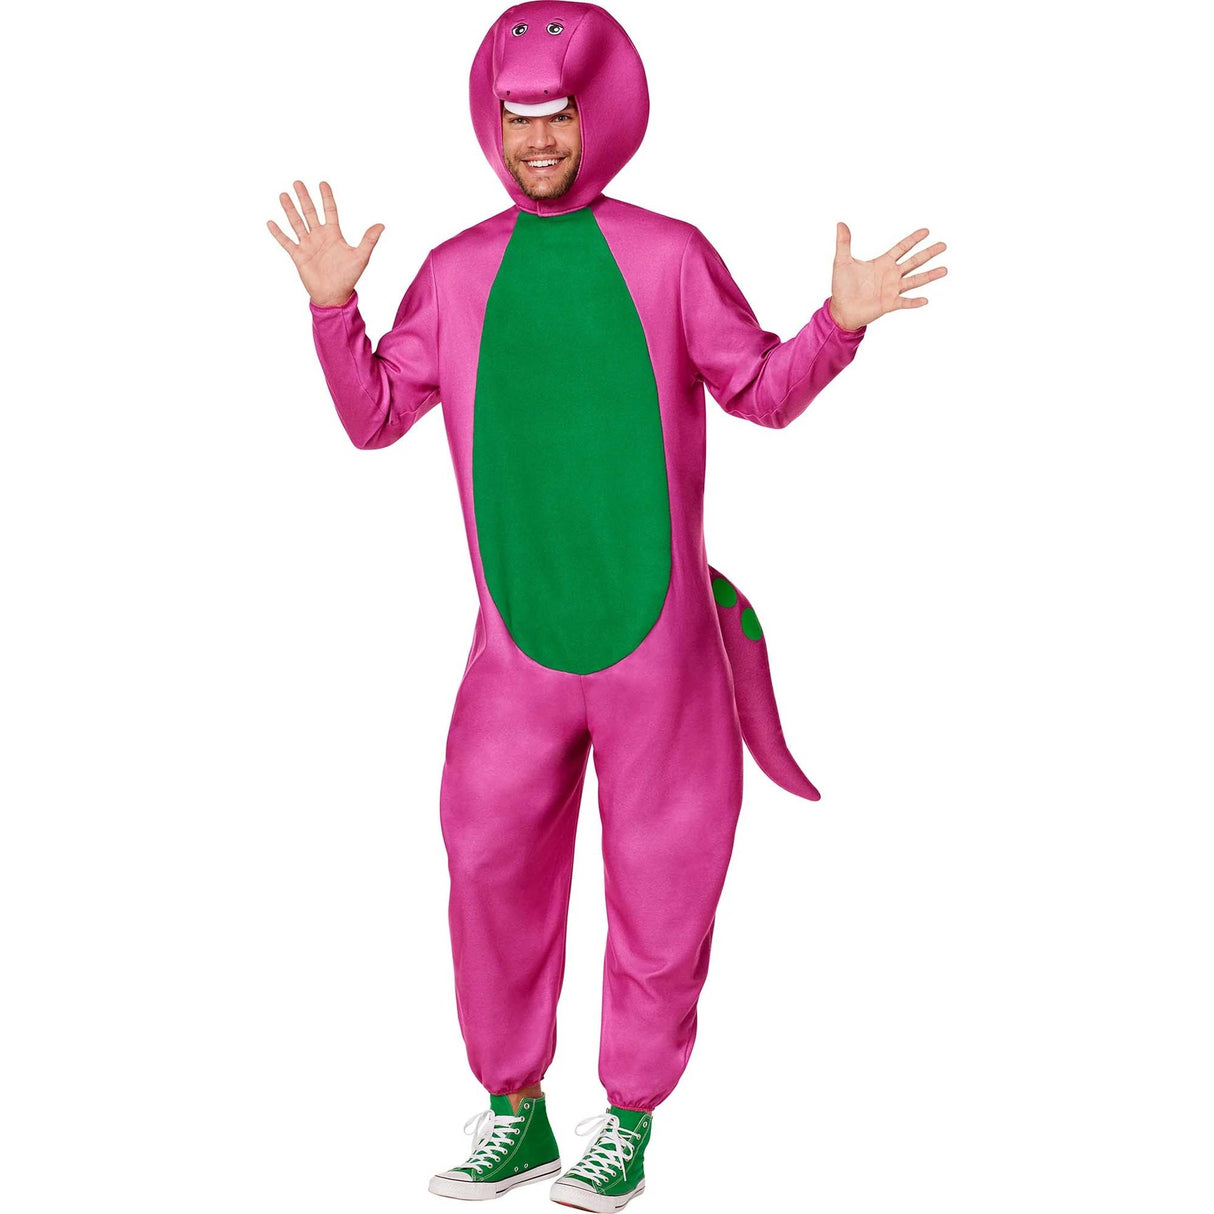 IN SPIRIT DESIGNS Costumes Barney the Dinosaur Costume for Adults, Pink and Green Jumpsuit